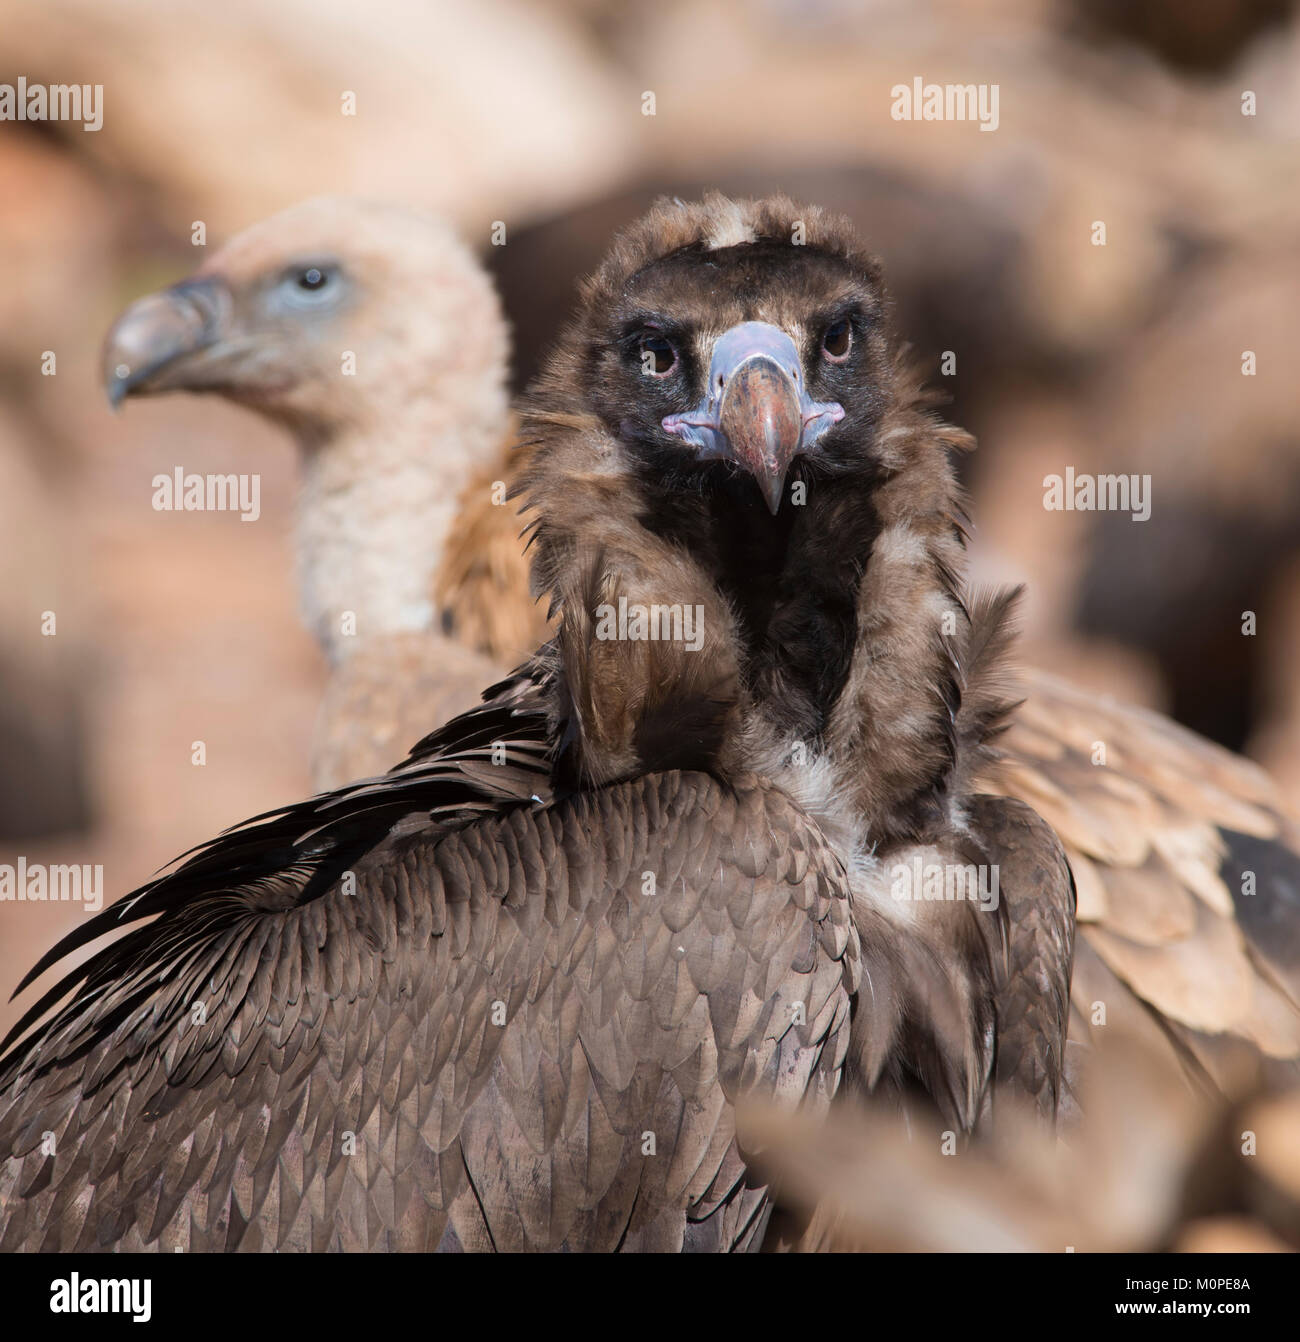 European Black/Cinereous Vulture (Aegypius monachus) sat on the ground in the Pyrenees mountains, Spain, looking face on Stock Photo